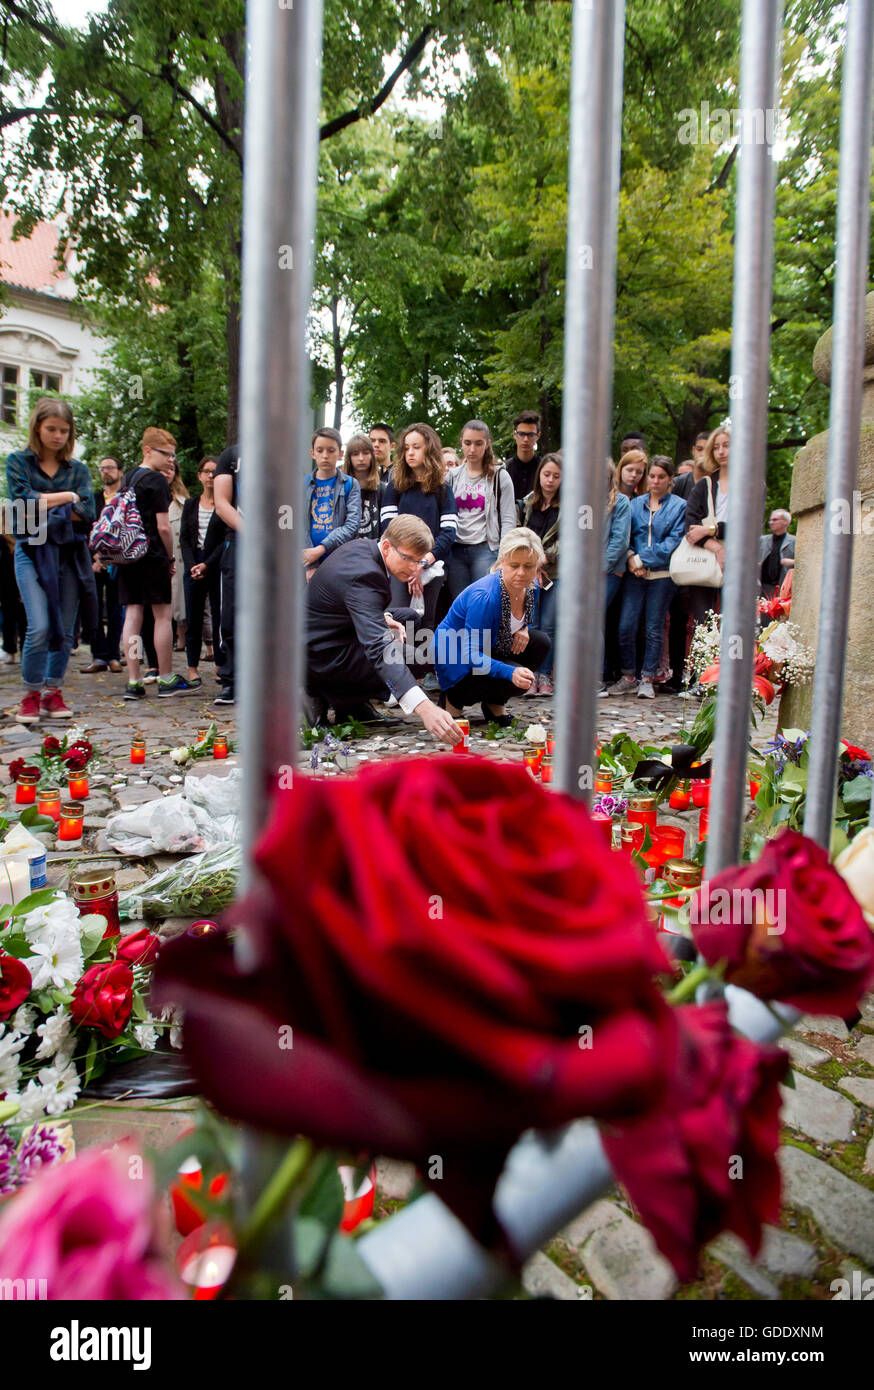 Prague, Czech Republic. 15th July, 2016. Czech people light candles and lay flowers outside the French Embassy in Prague in tribute for the victims of the Nice attacks, in Prague, Czech Republic, 15 July 2016. According to reports, more than 80 people died and many were wounded. Credit:  Vit Simanek/CTK Photo/Alamy Live News Stock Photo